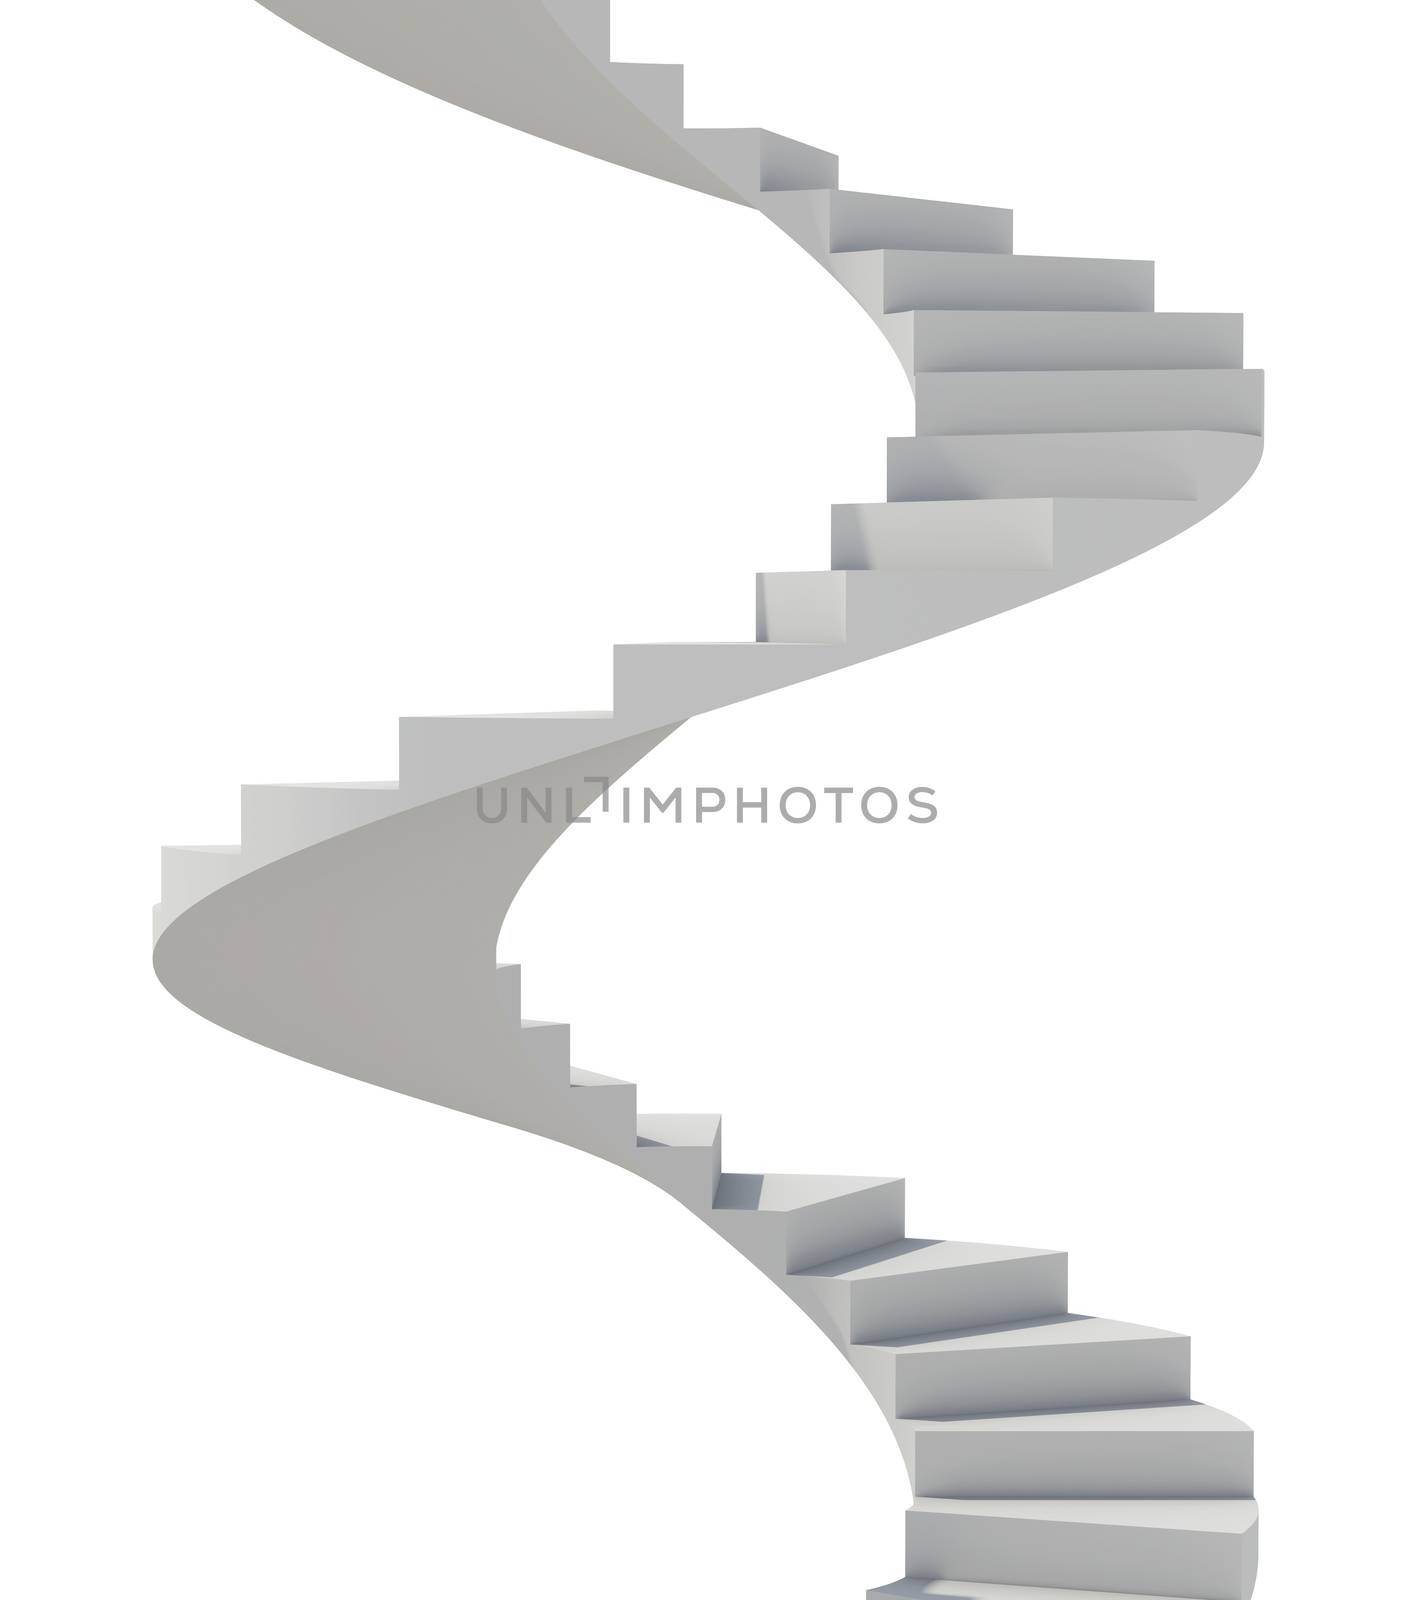 Spiral staircase. Isolated render on white background